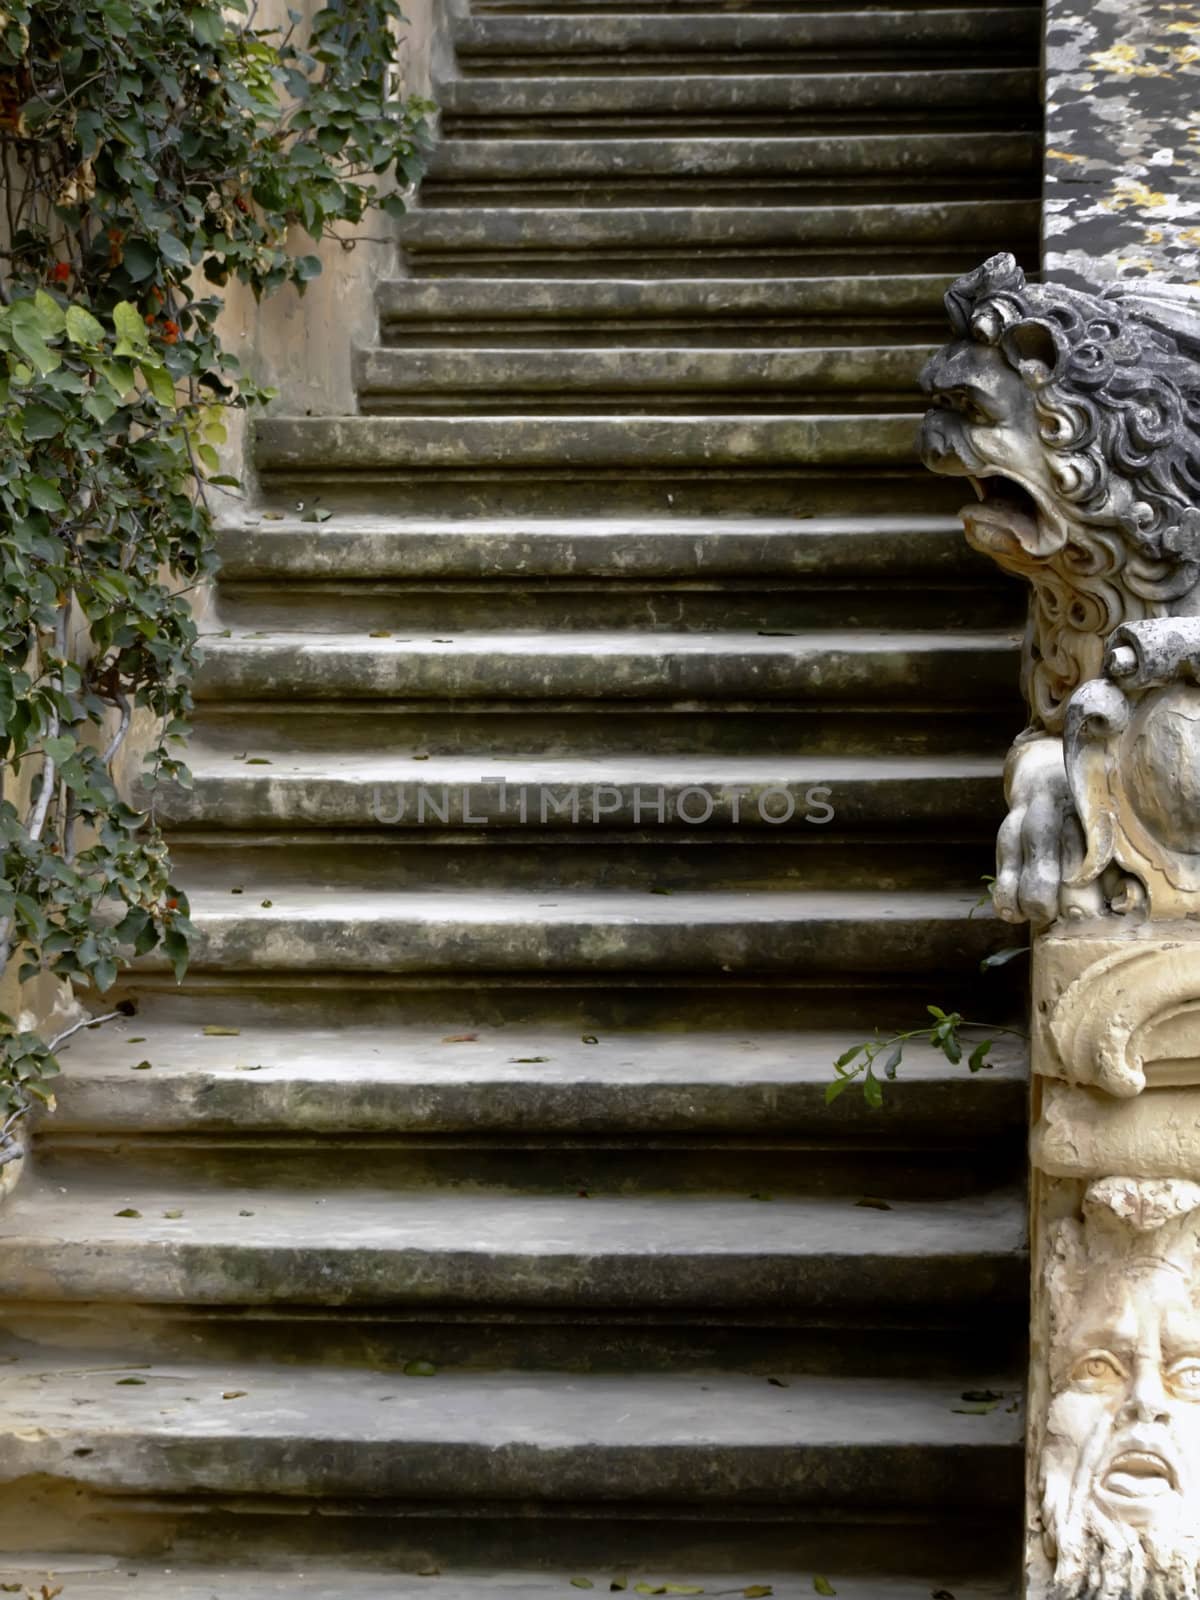 Imposing medieval stone sculpture of lion, guarding palace staircase.